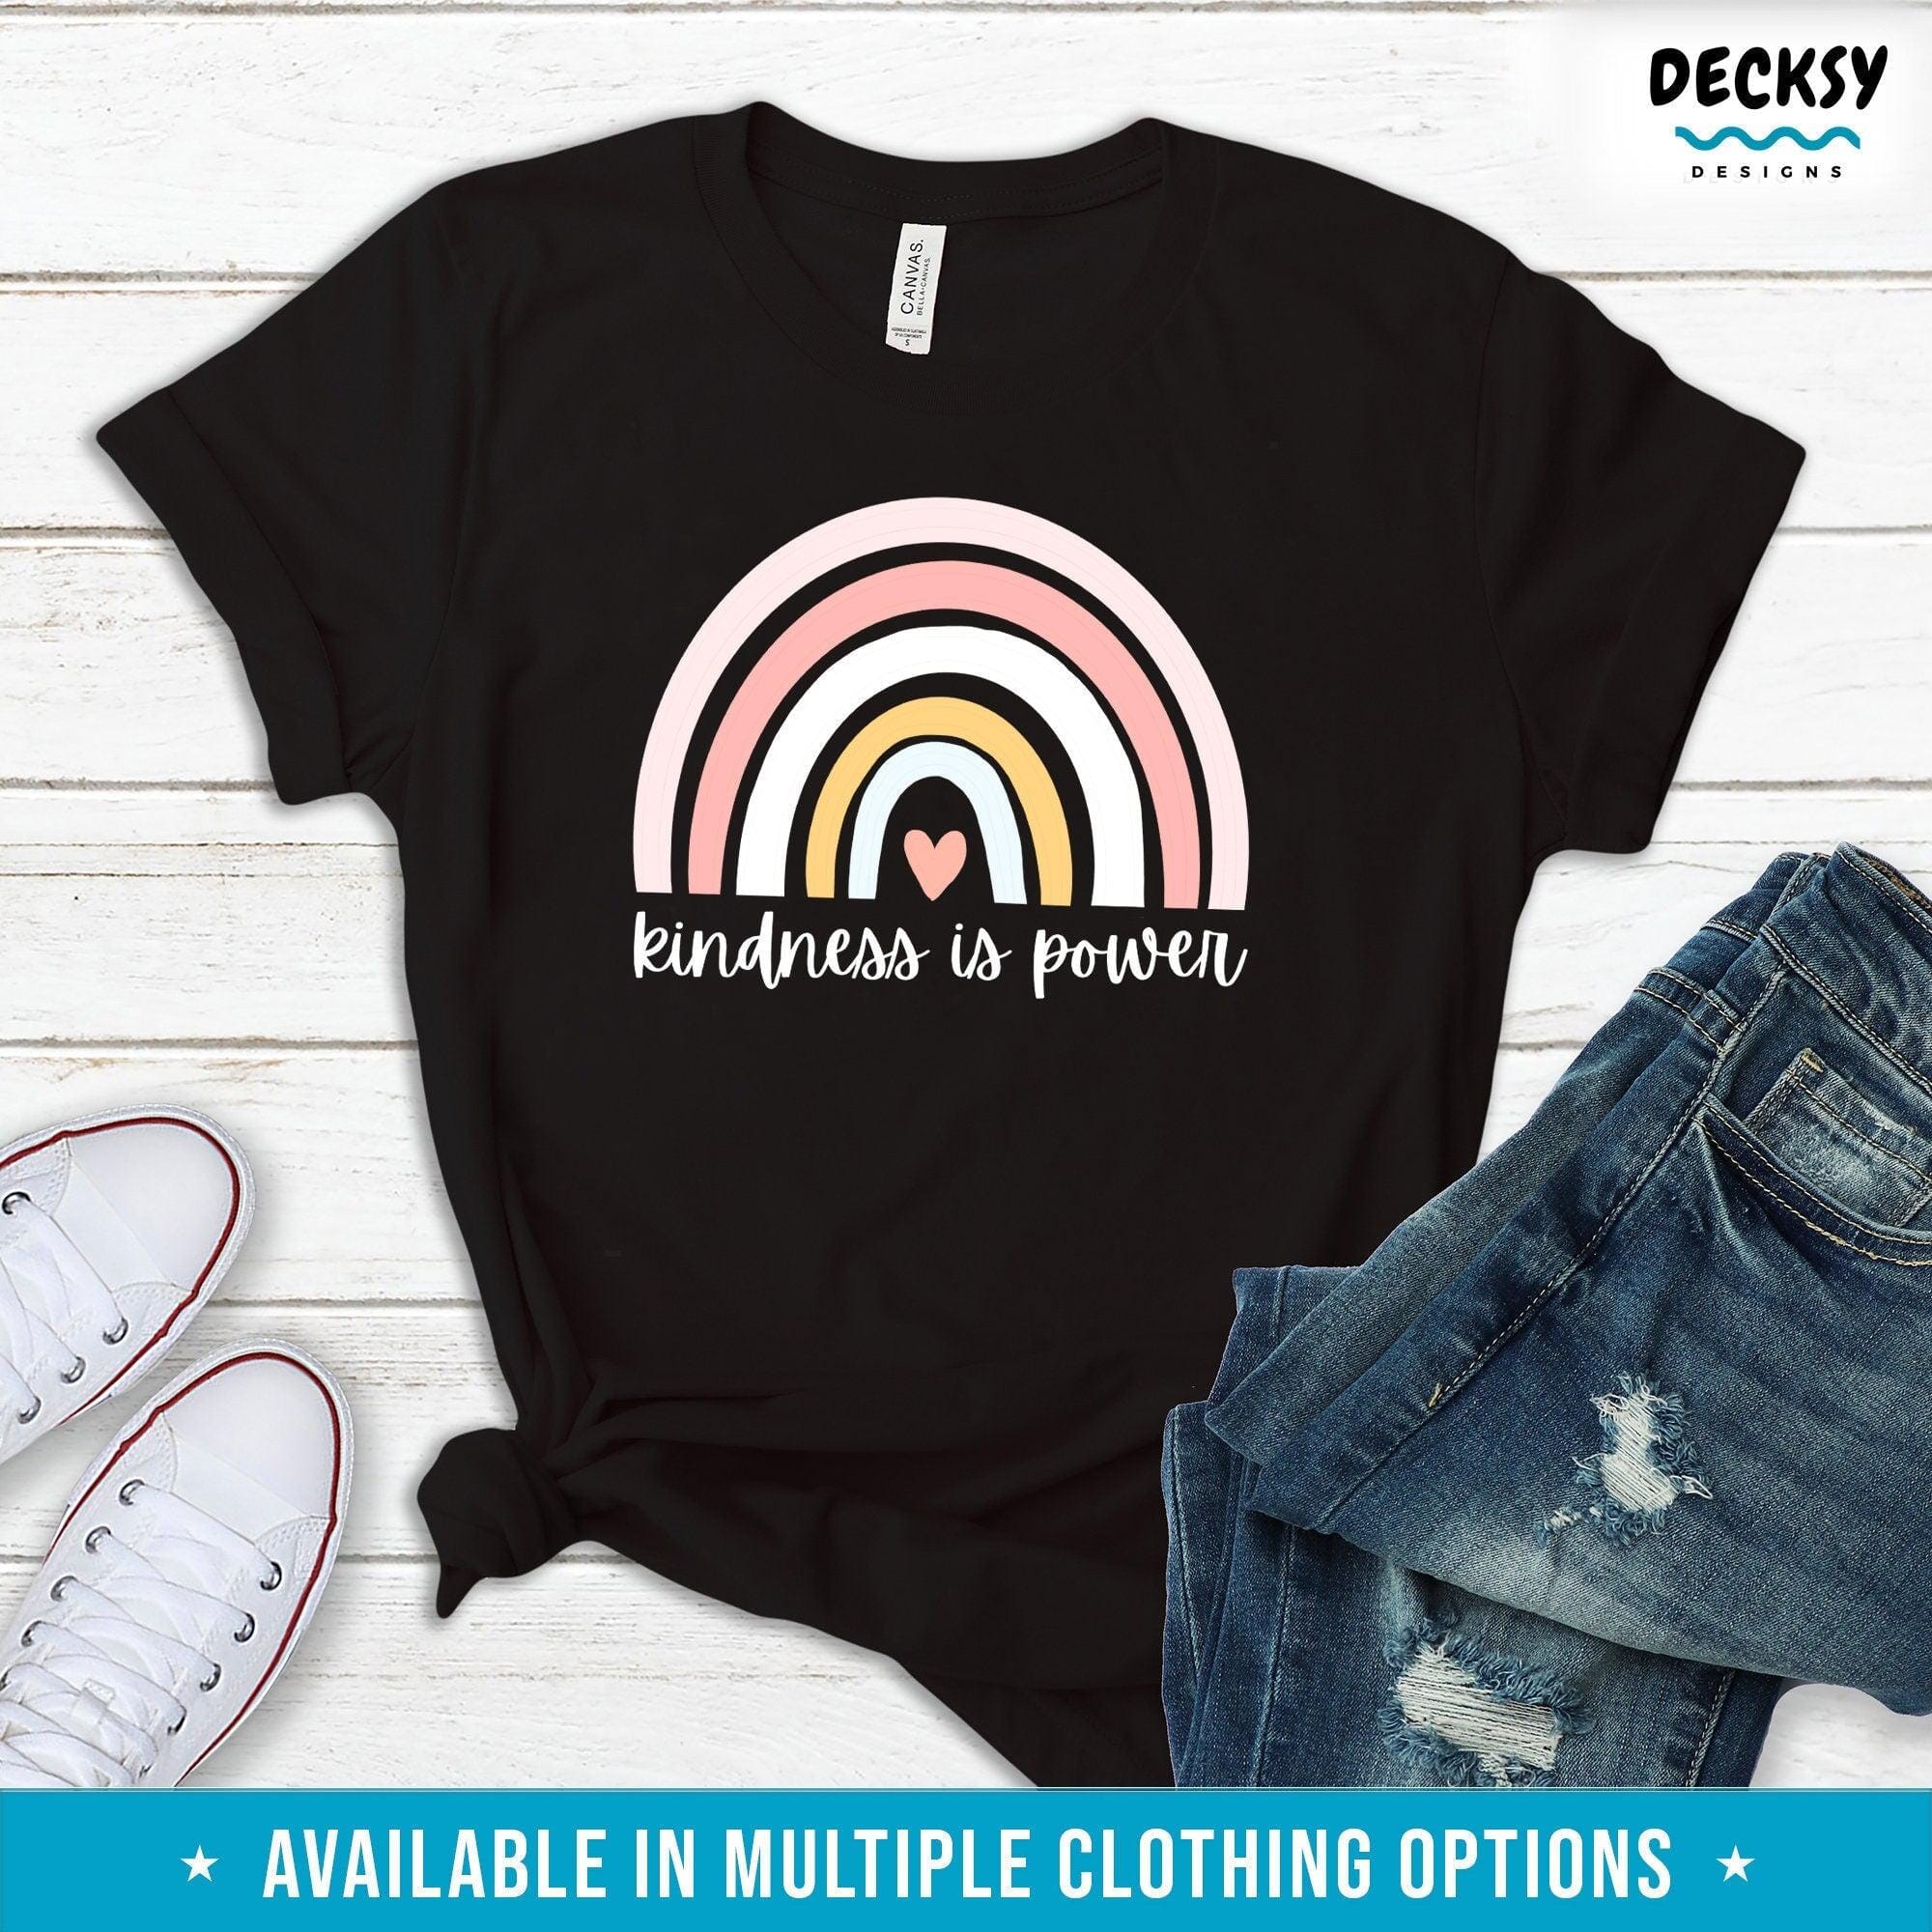 Kindness Is Power Shirt, Positive Vibes Inspirational Gift-Clothing:Gender-Neutral Adult Clothing:Tops & Tees:T-shirts:Graphic Tees-DecksyDesigns